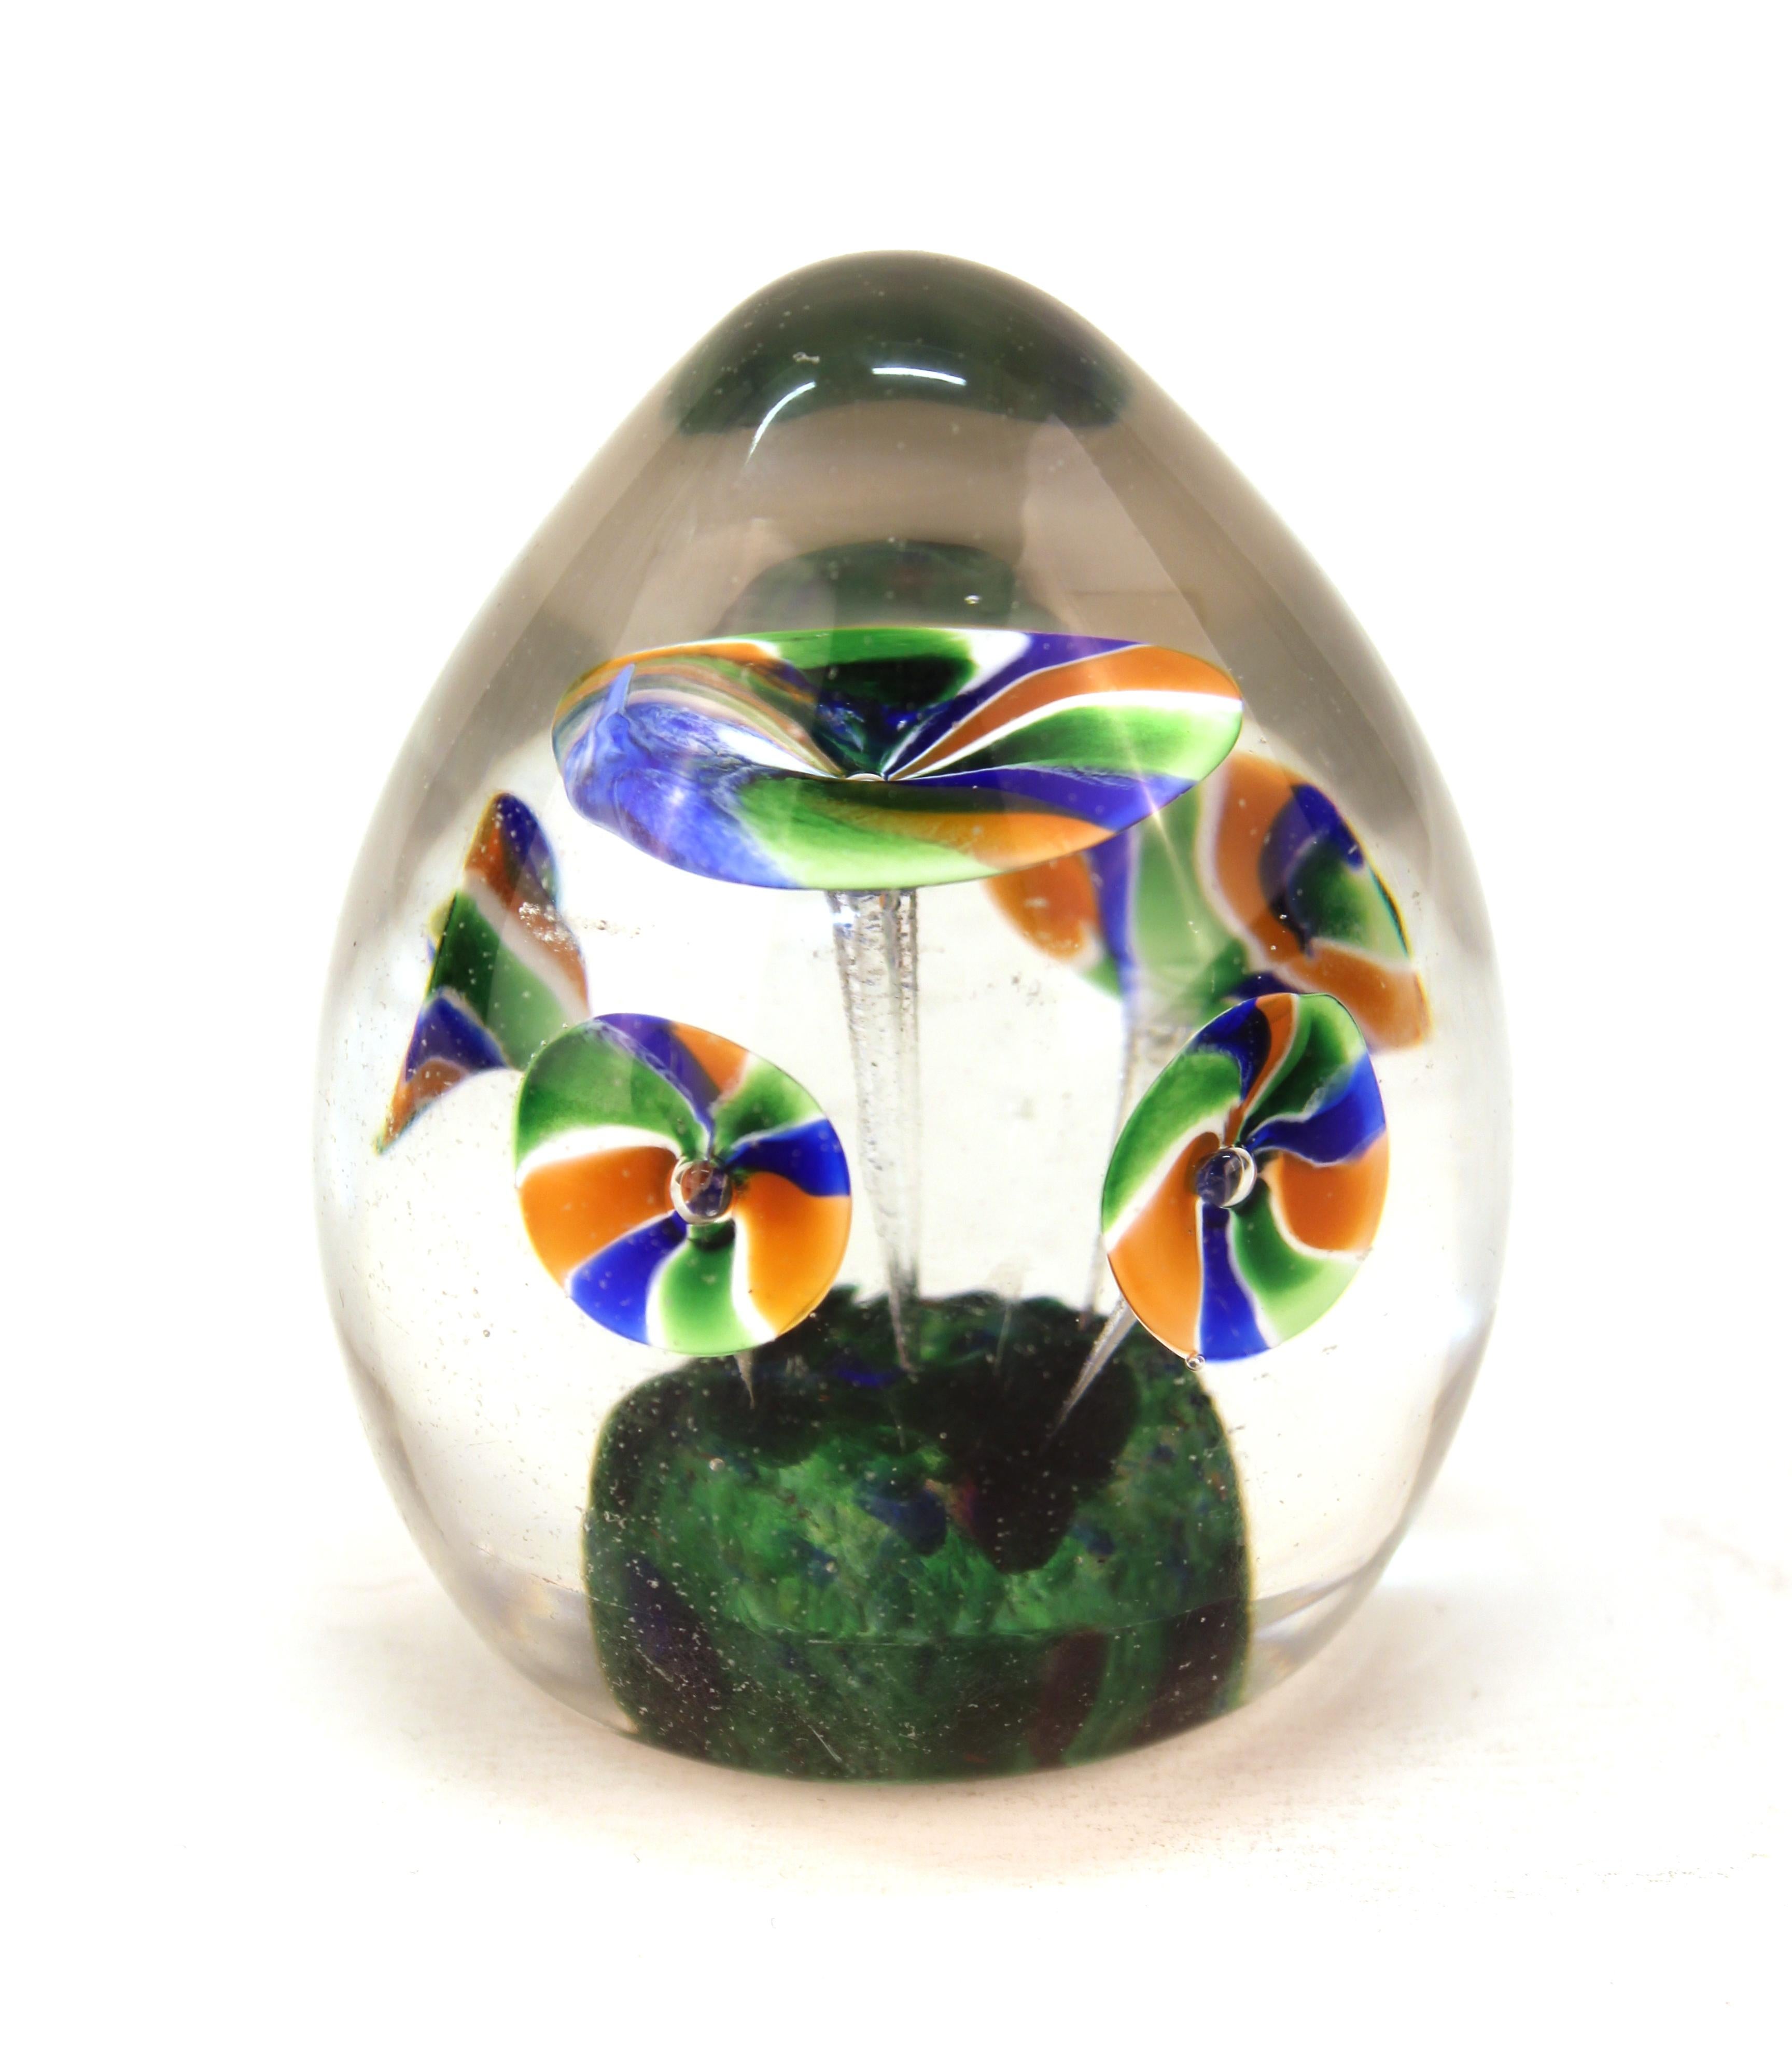 Italian Mid-Century Modern Murano art glass paperweight in elongated egg-shape, with floral motif and old price-tag on bottom. The piece is in great vintage condition with some wear to the bottom.